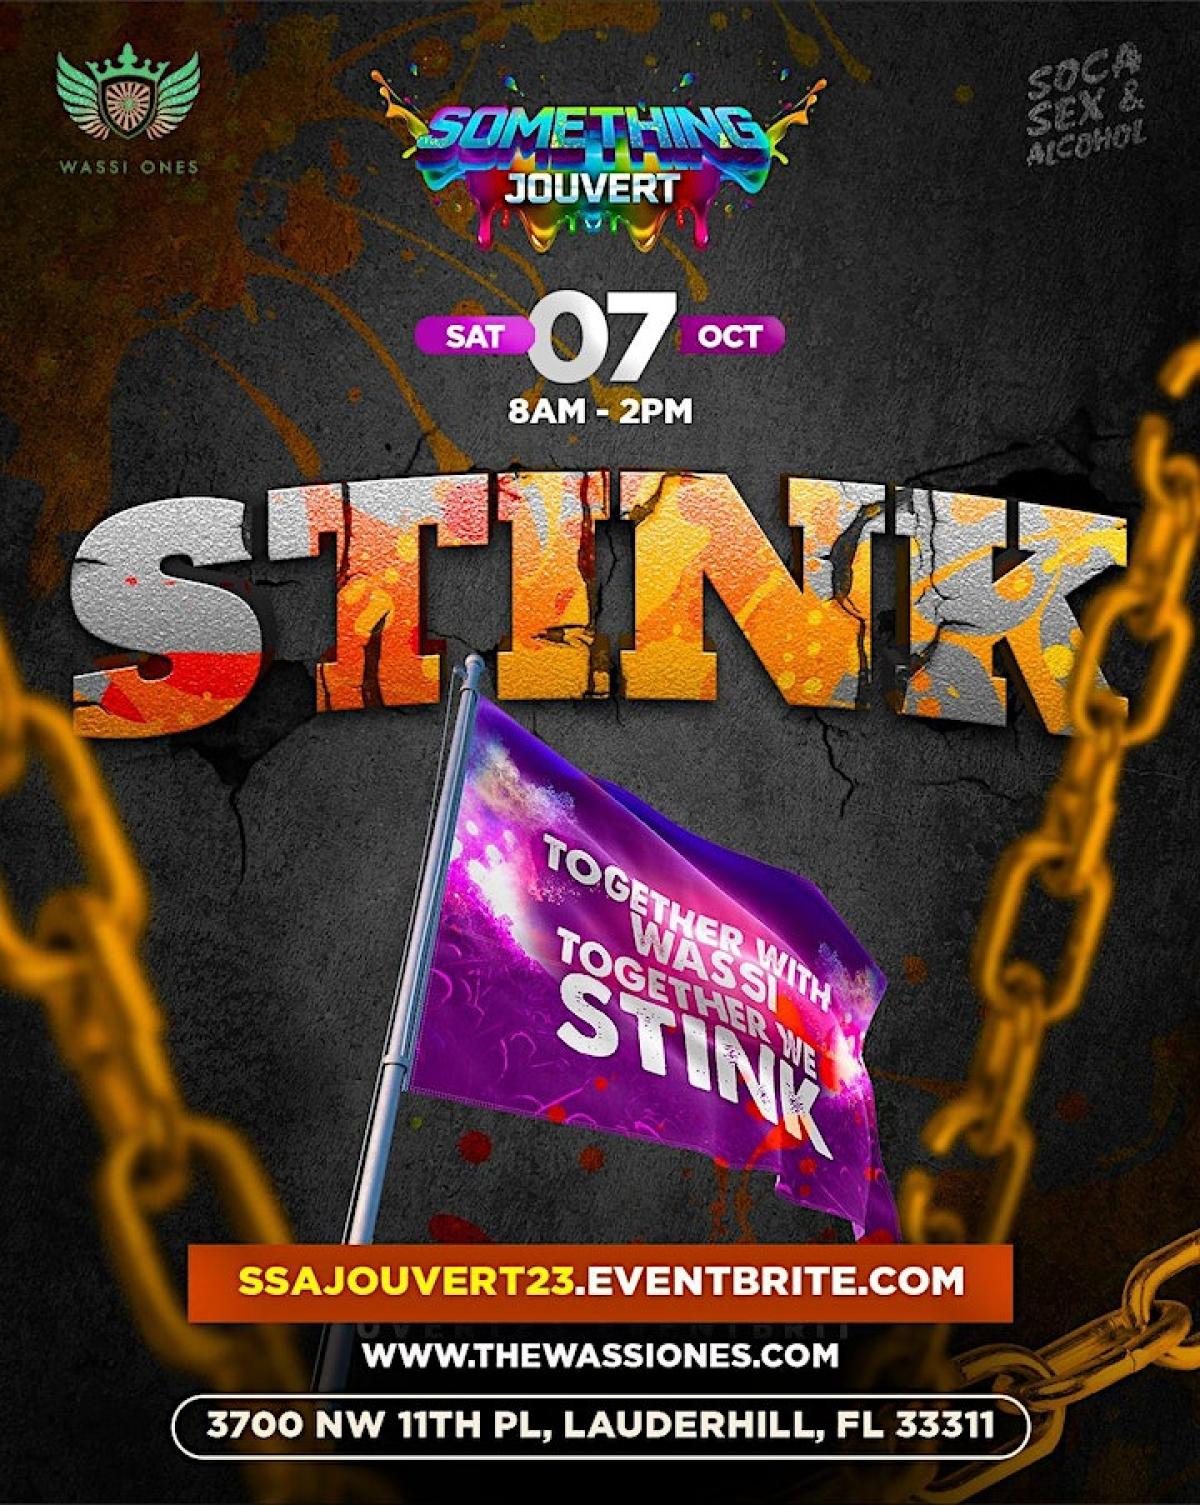 SSA Jouvert flyer or graphic.